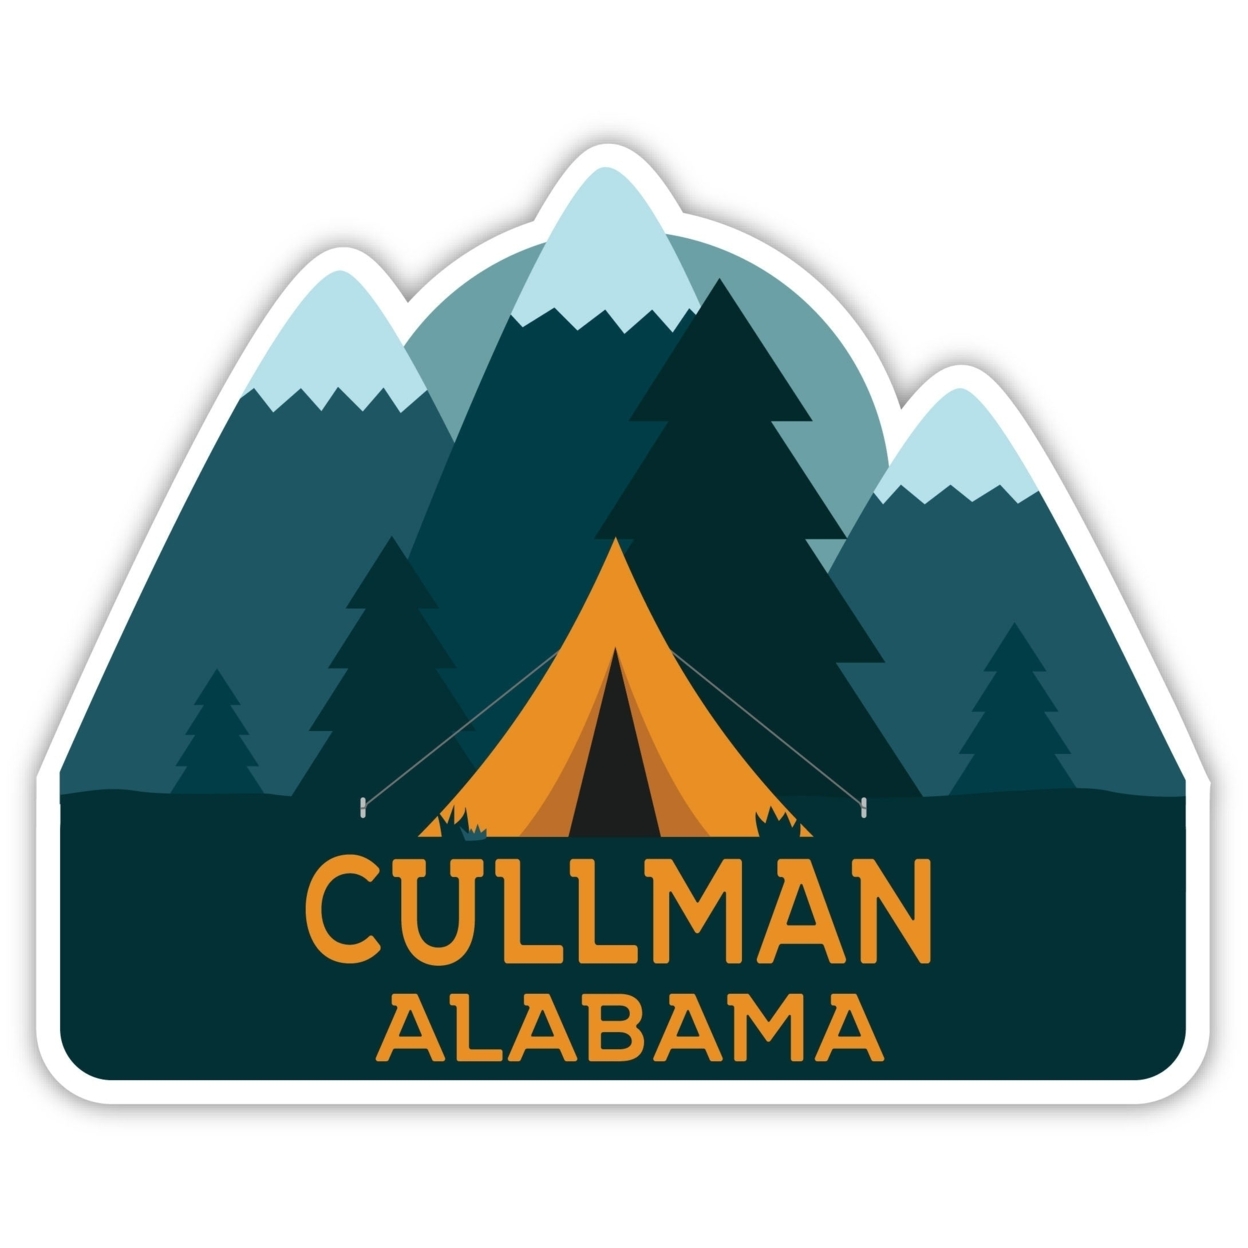 Cullman Alabama Souvenir Decorative Stickers (Choose Theme And Size) - 4-Pack, 6-Inch, Adventures Awaits